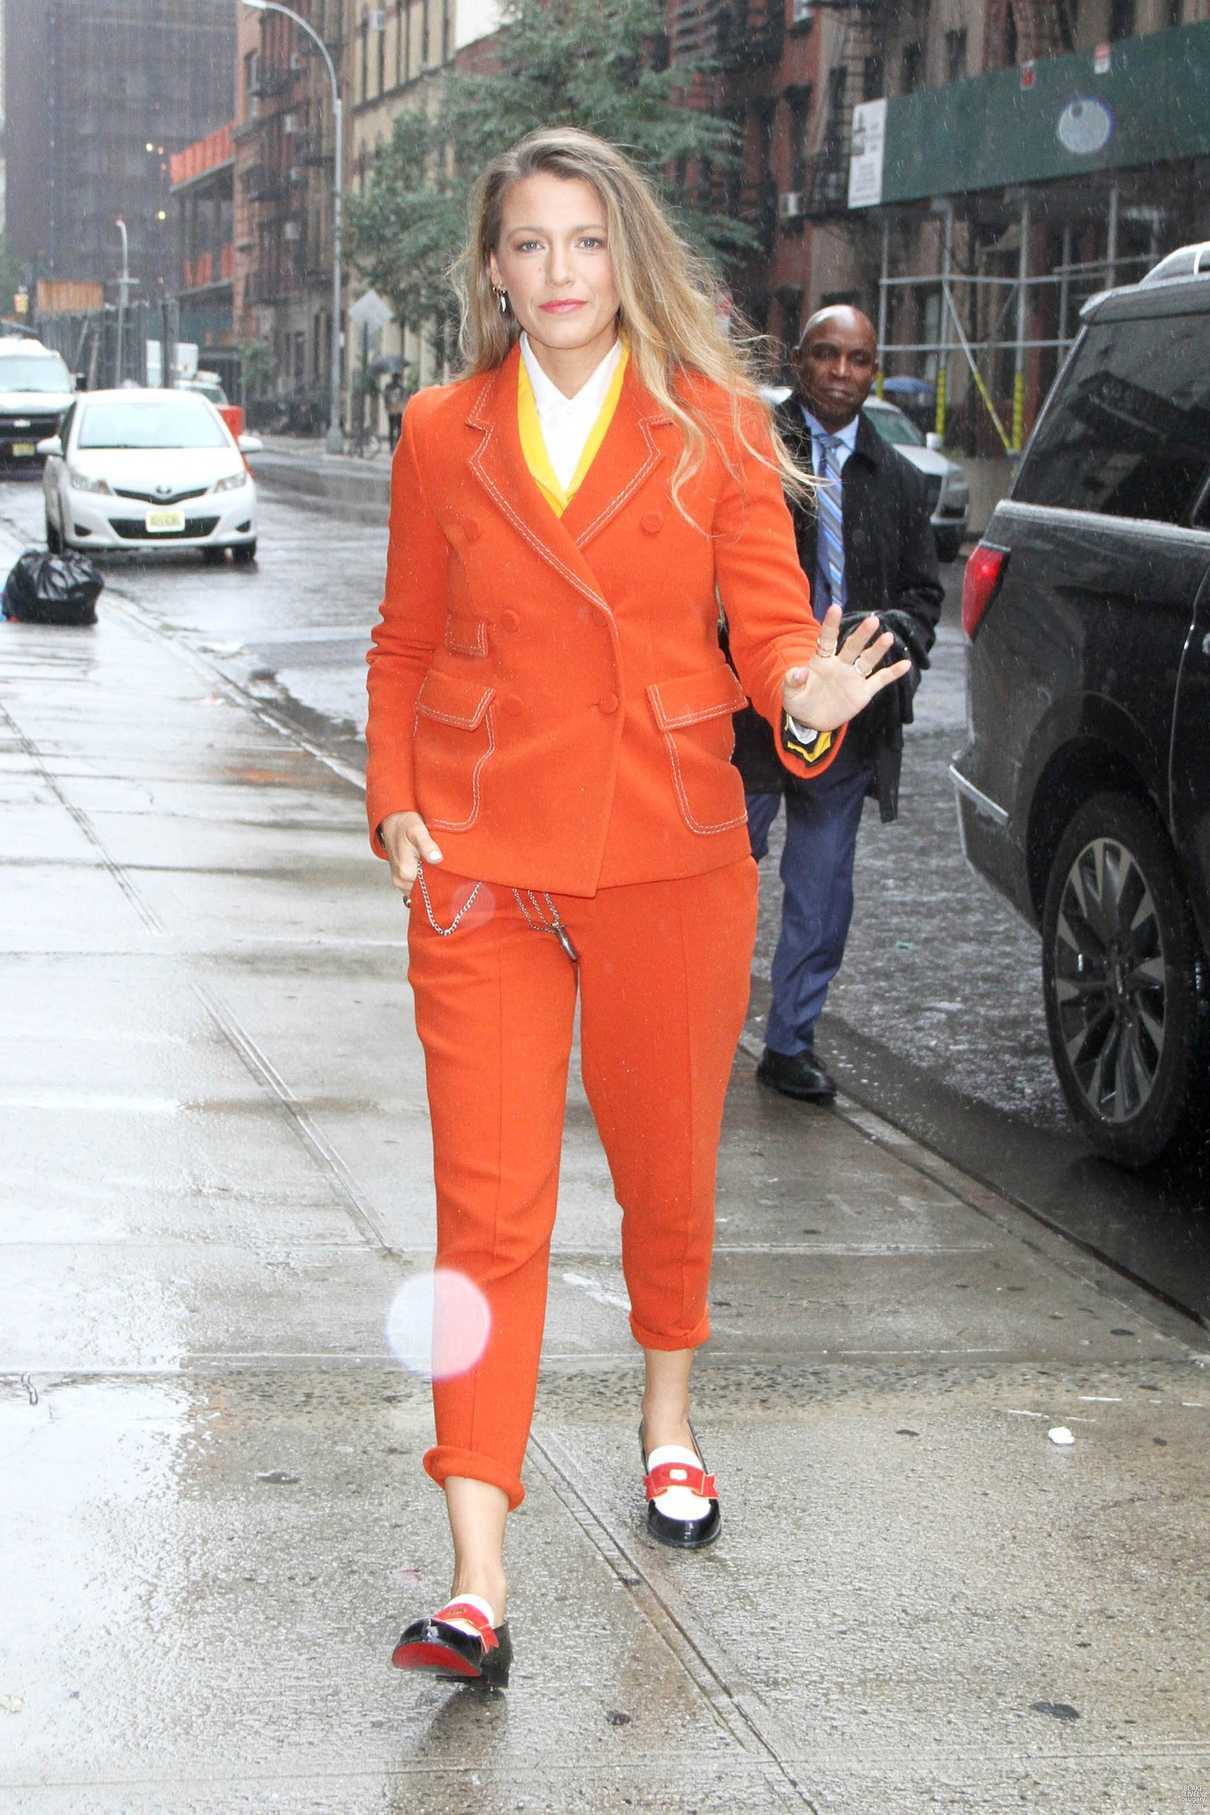 Blake Lively In An Orange Suit Was Seen Out In New York City 09102018 1 Lacelebsco 